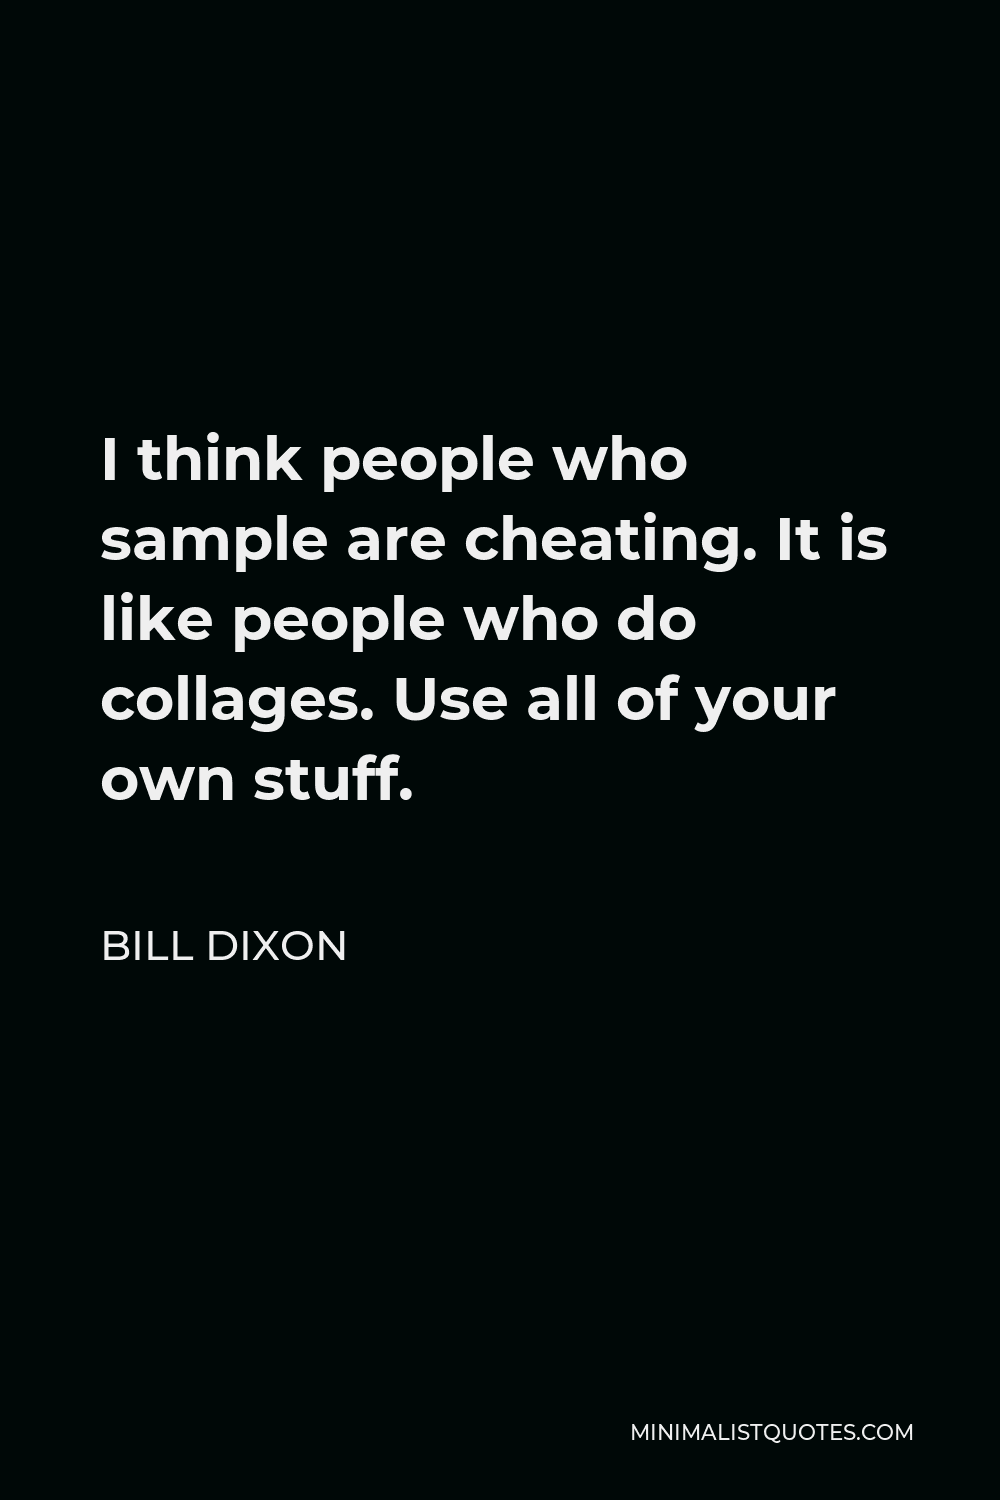 Bill Dixon Quote - I think people who sample are cheating. It is like people who do collages. Use all of your own stuff.